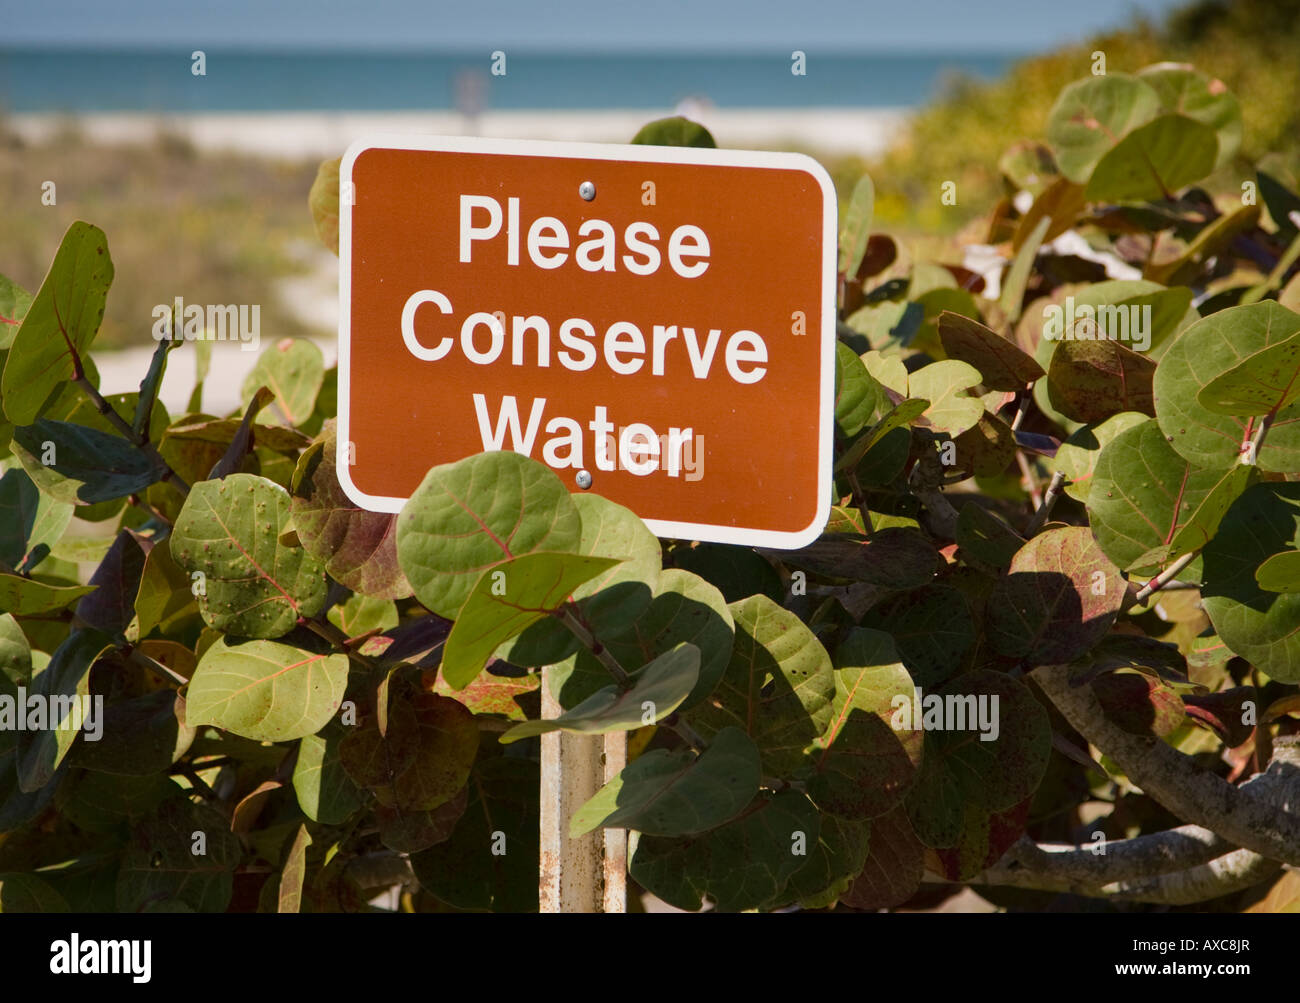 Sign requesting water conservation Stock Photo